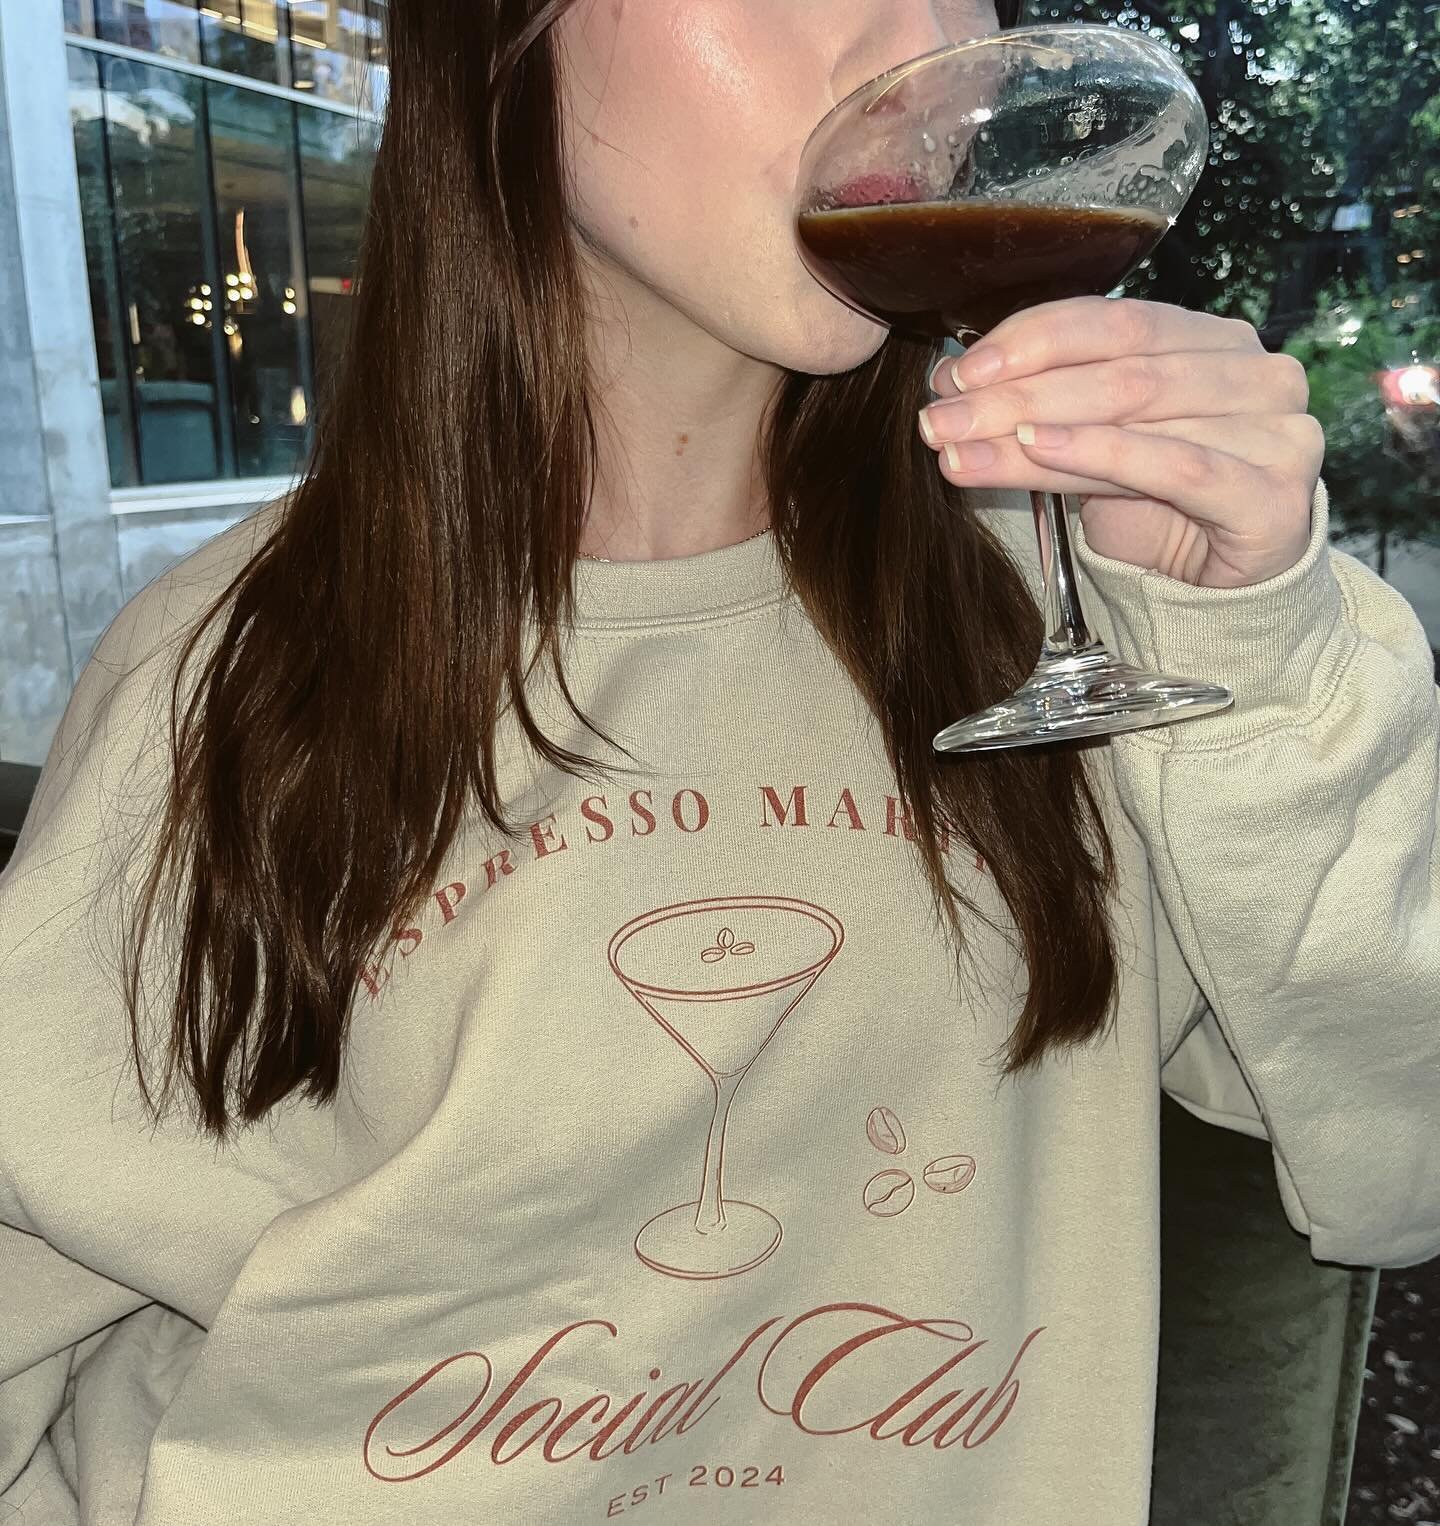 ESPRESSO MARTINI SOCIAL CLUB⚡️🍸☕️ How cute are these crewnecks?! 

Perfect for bach parties, birthdays, or espresso tini lovers 🥳💌 Click the link in bio to shop!

#thebachplan #bachelorettebags #bachelorettethemes #bachelorettepartyideas #bachelor